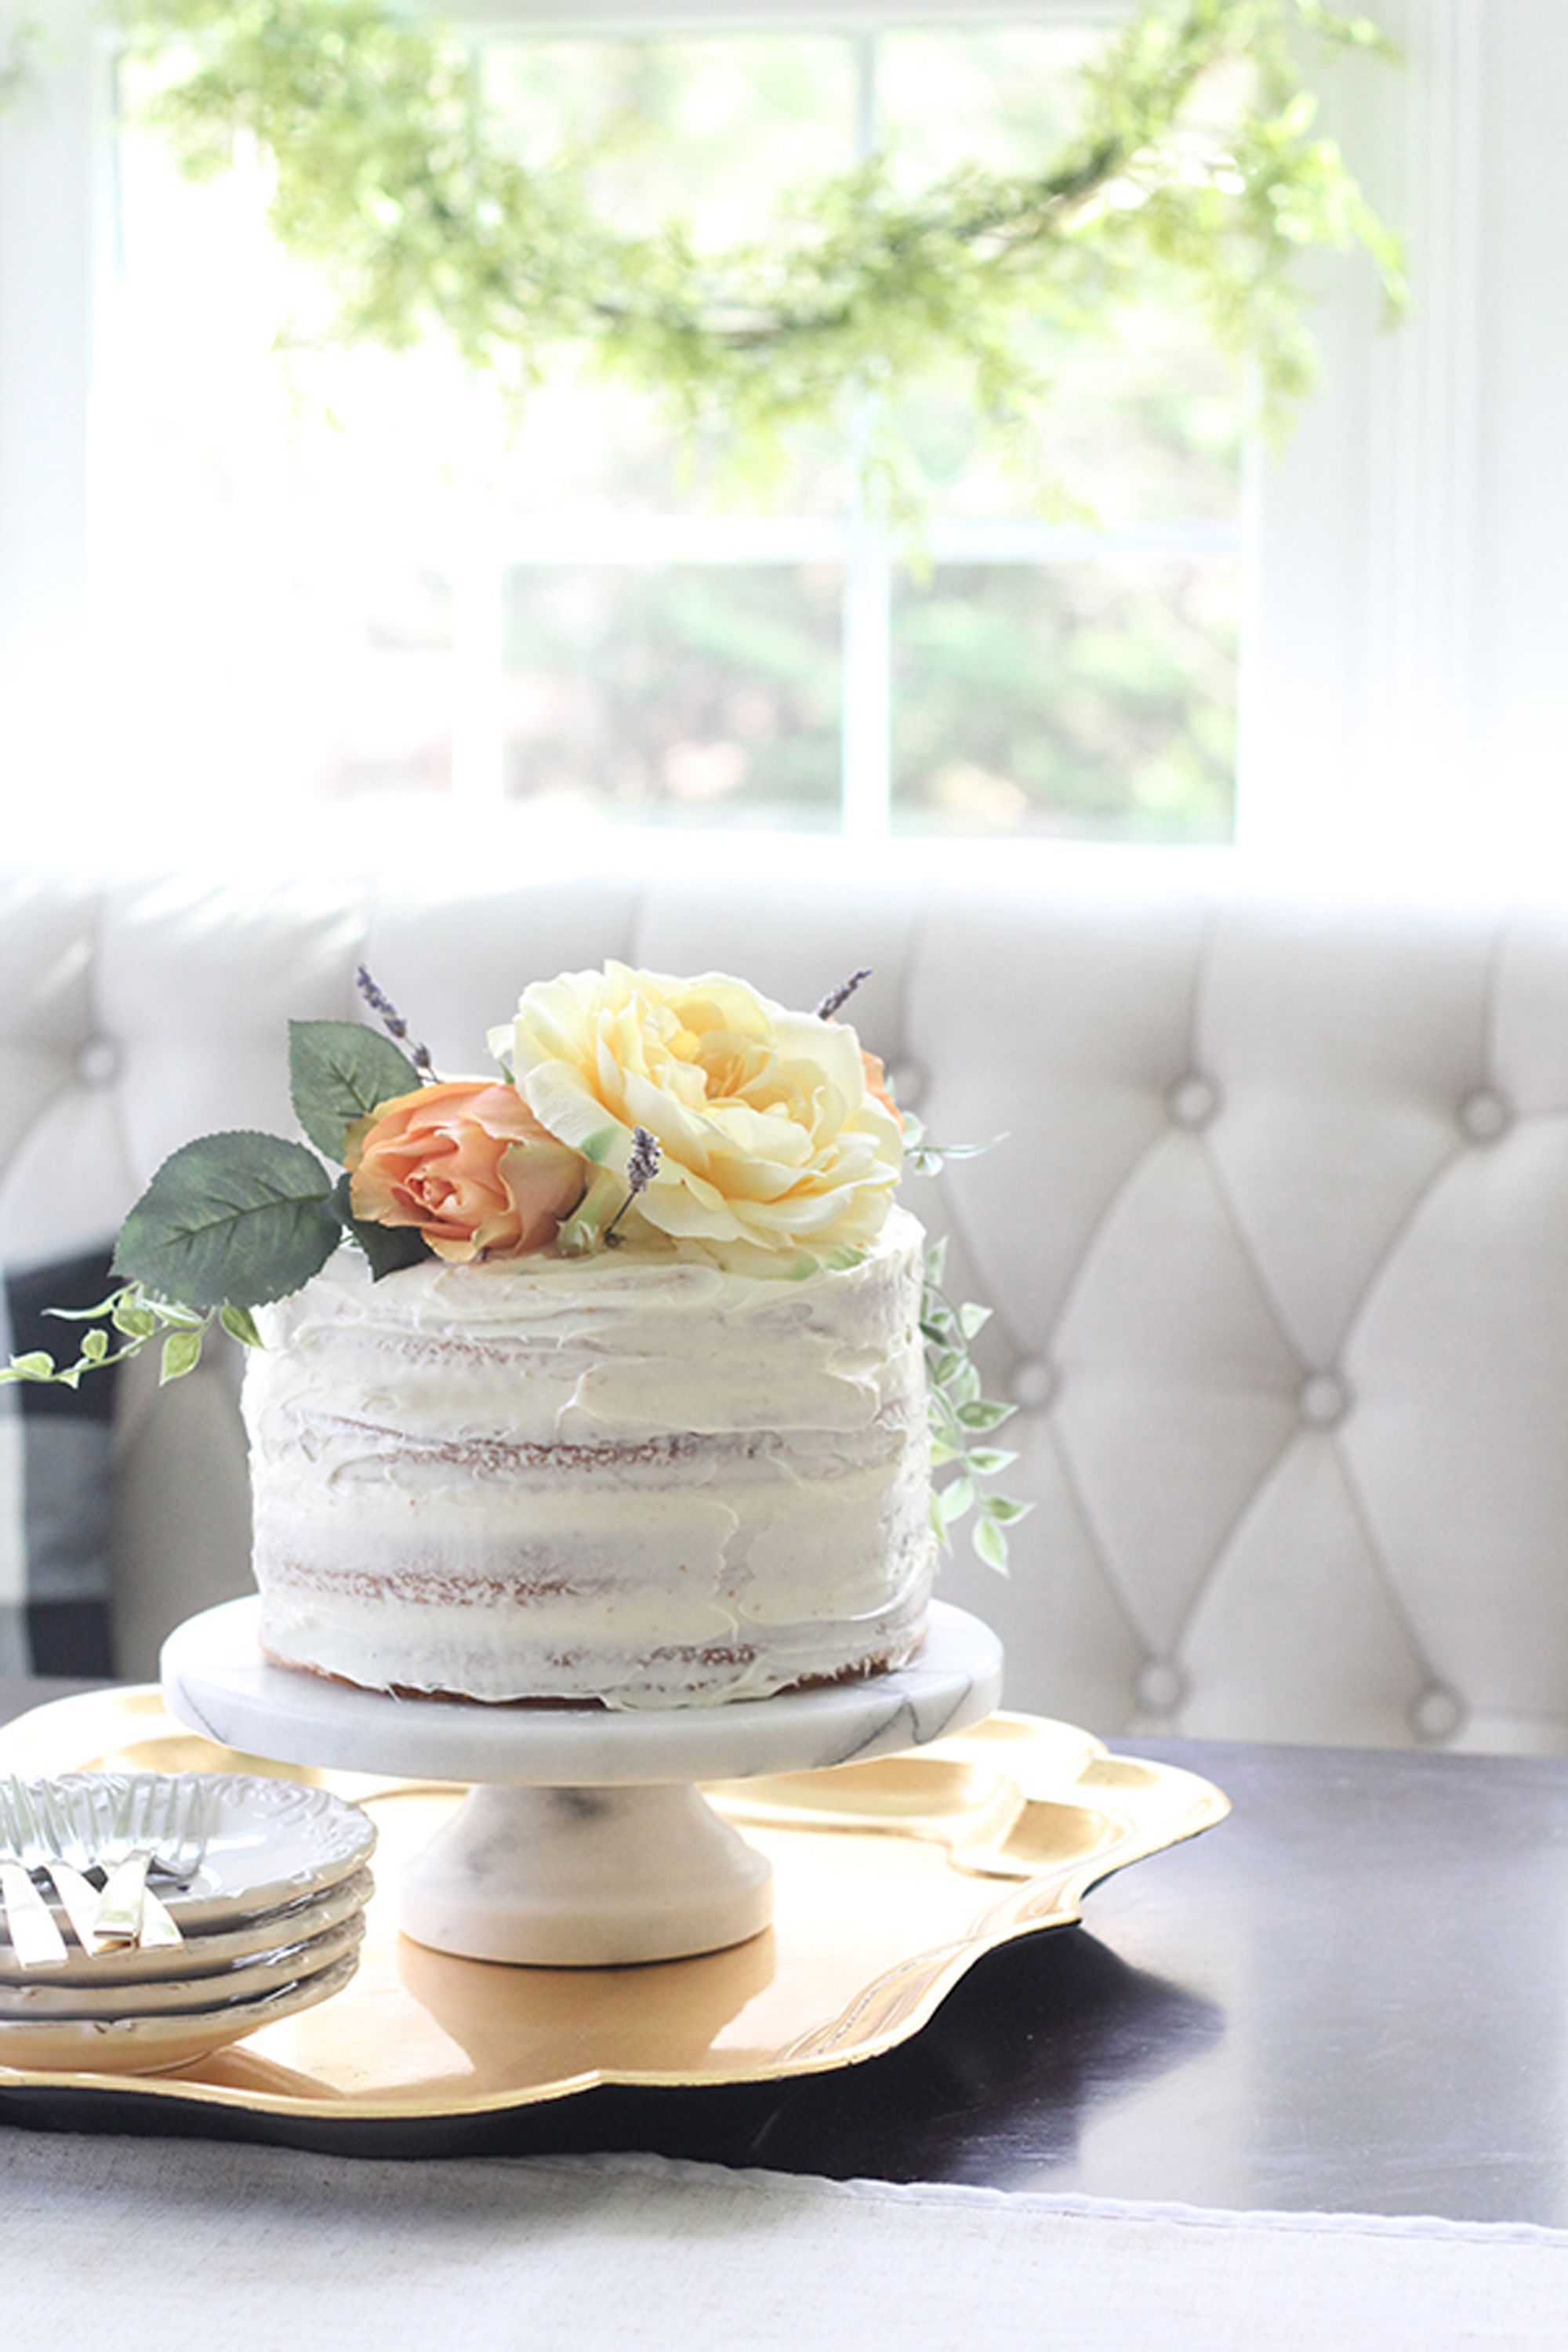 25 Best Homemade Wedding Cake Recipes From Scratch How To Make A